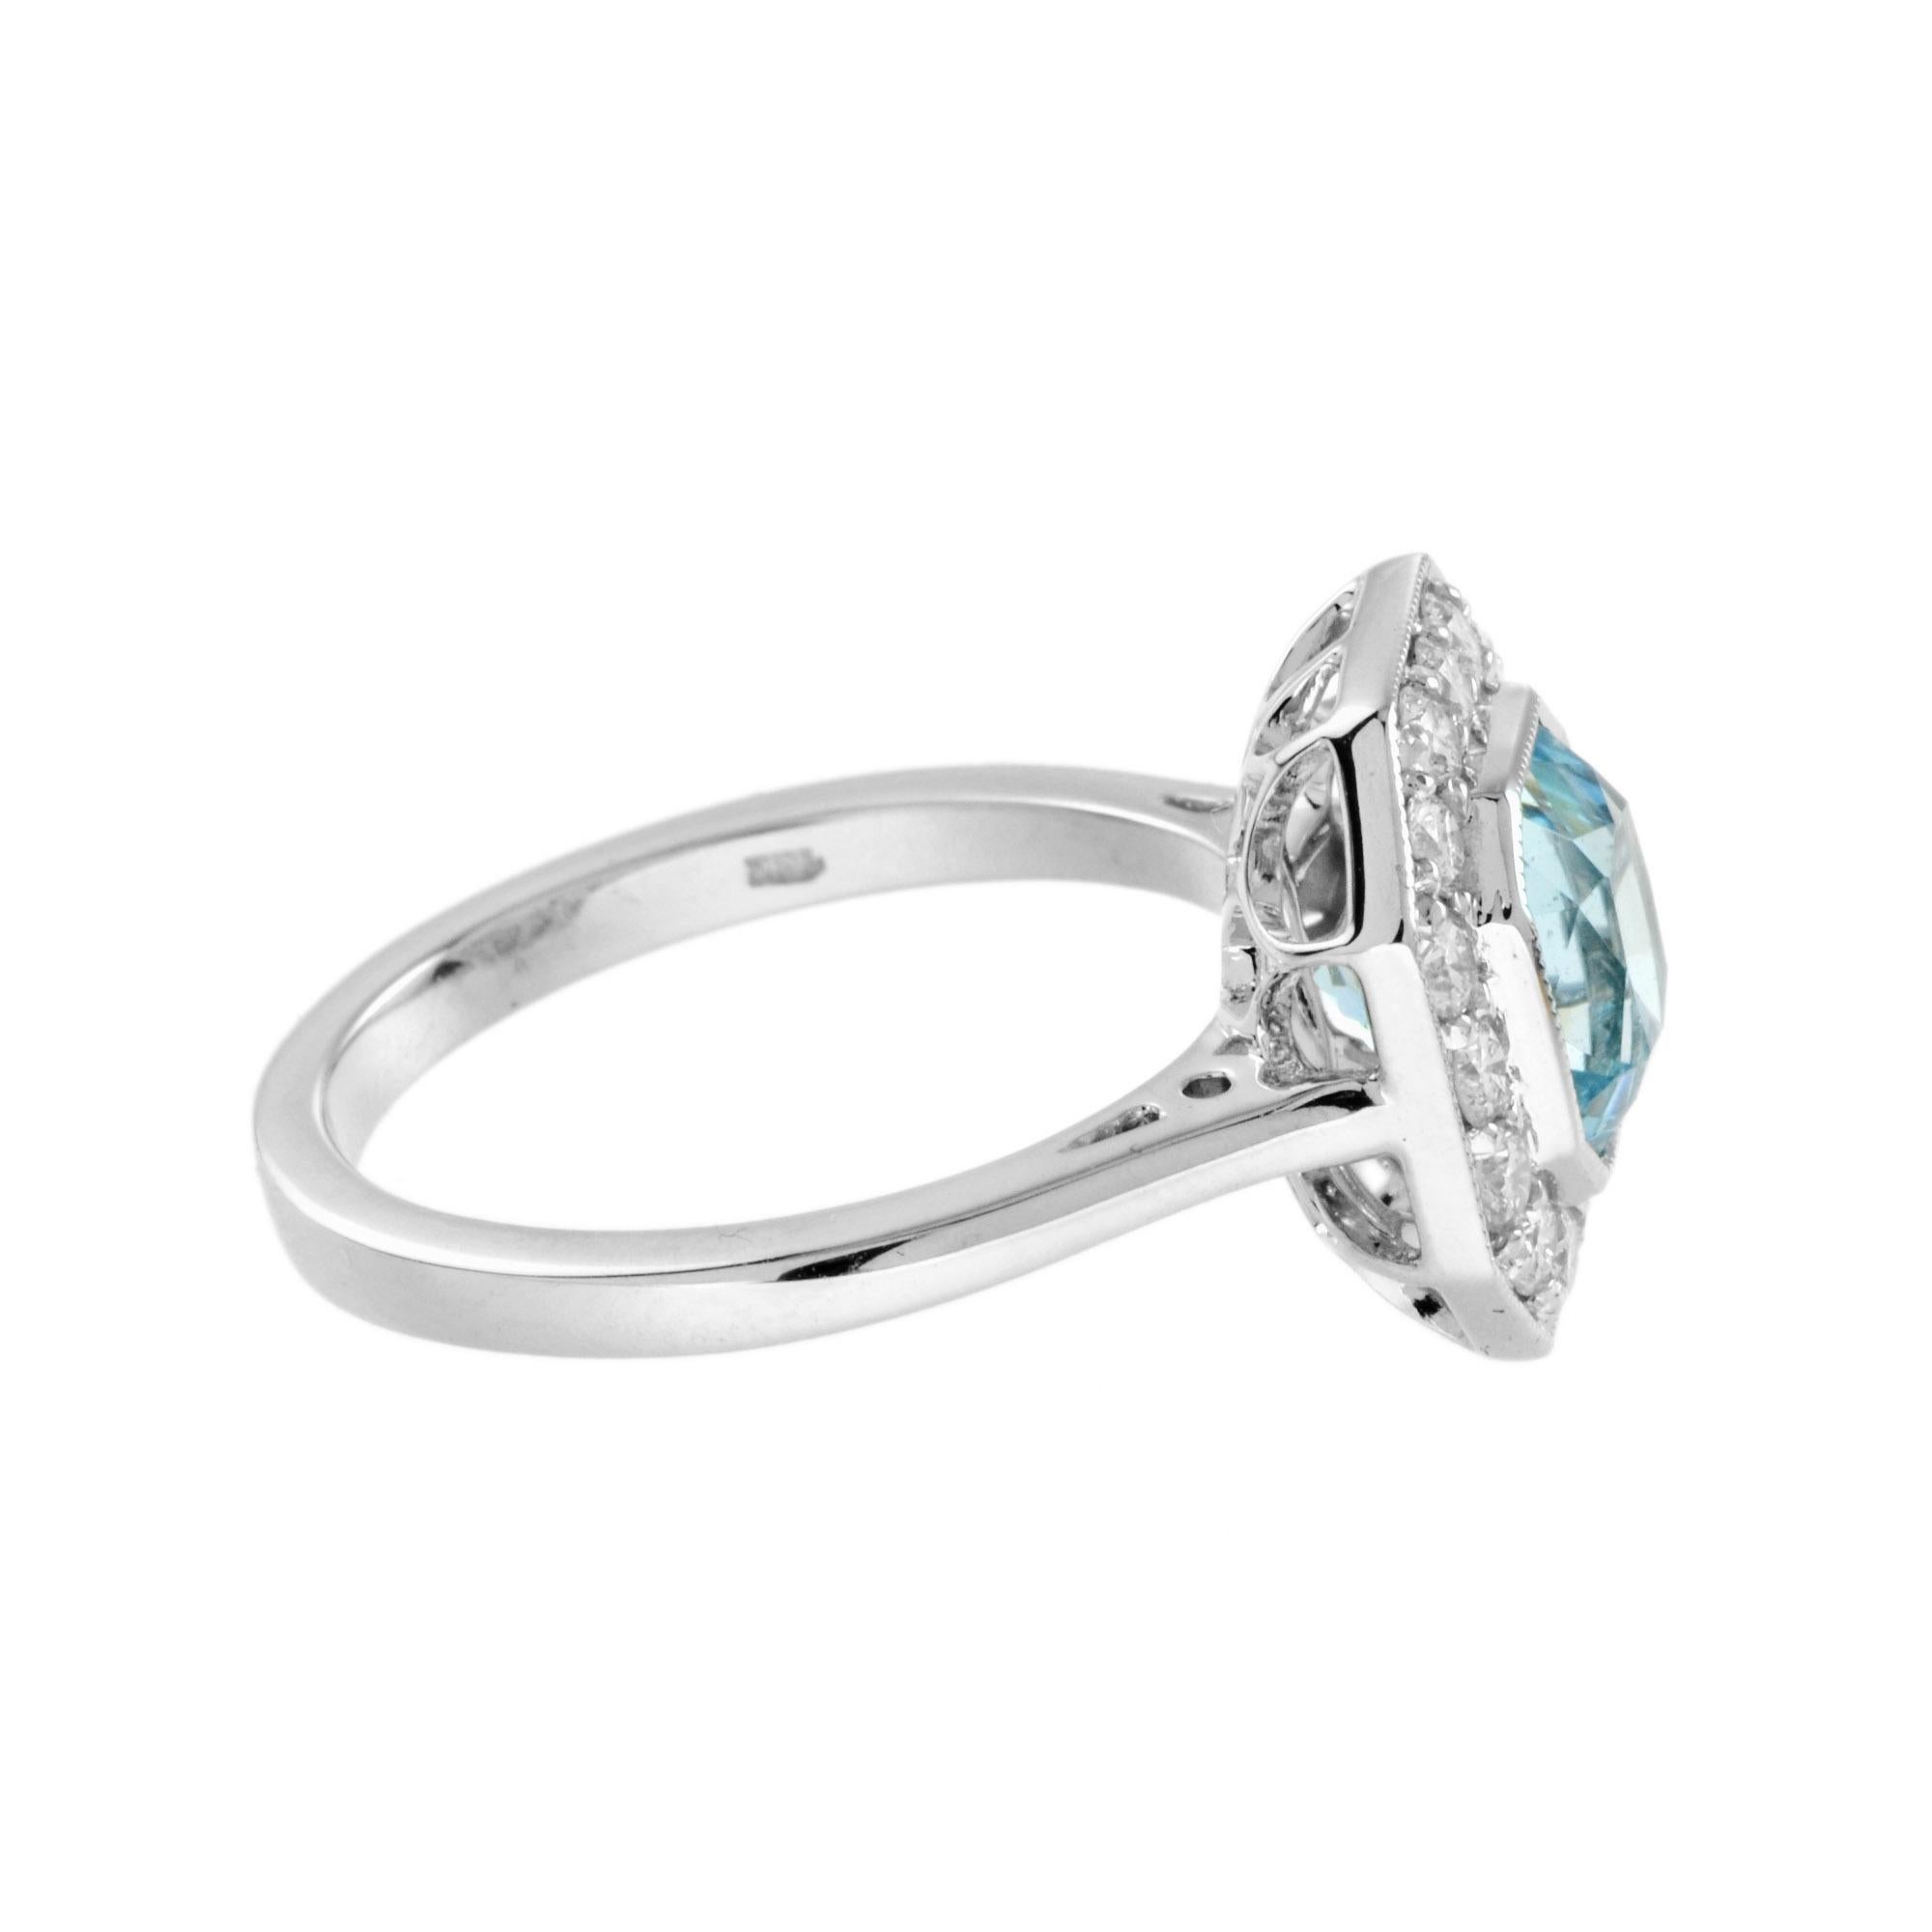 For Sale:  2.7 Ct. Blue Topaz and Diamond Art Deco Style Halo Engagement Ring in 14K Gold 4